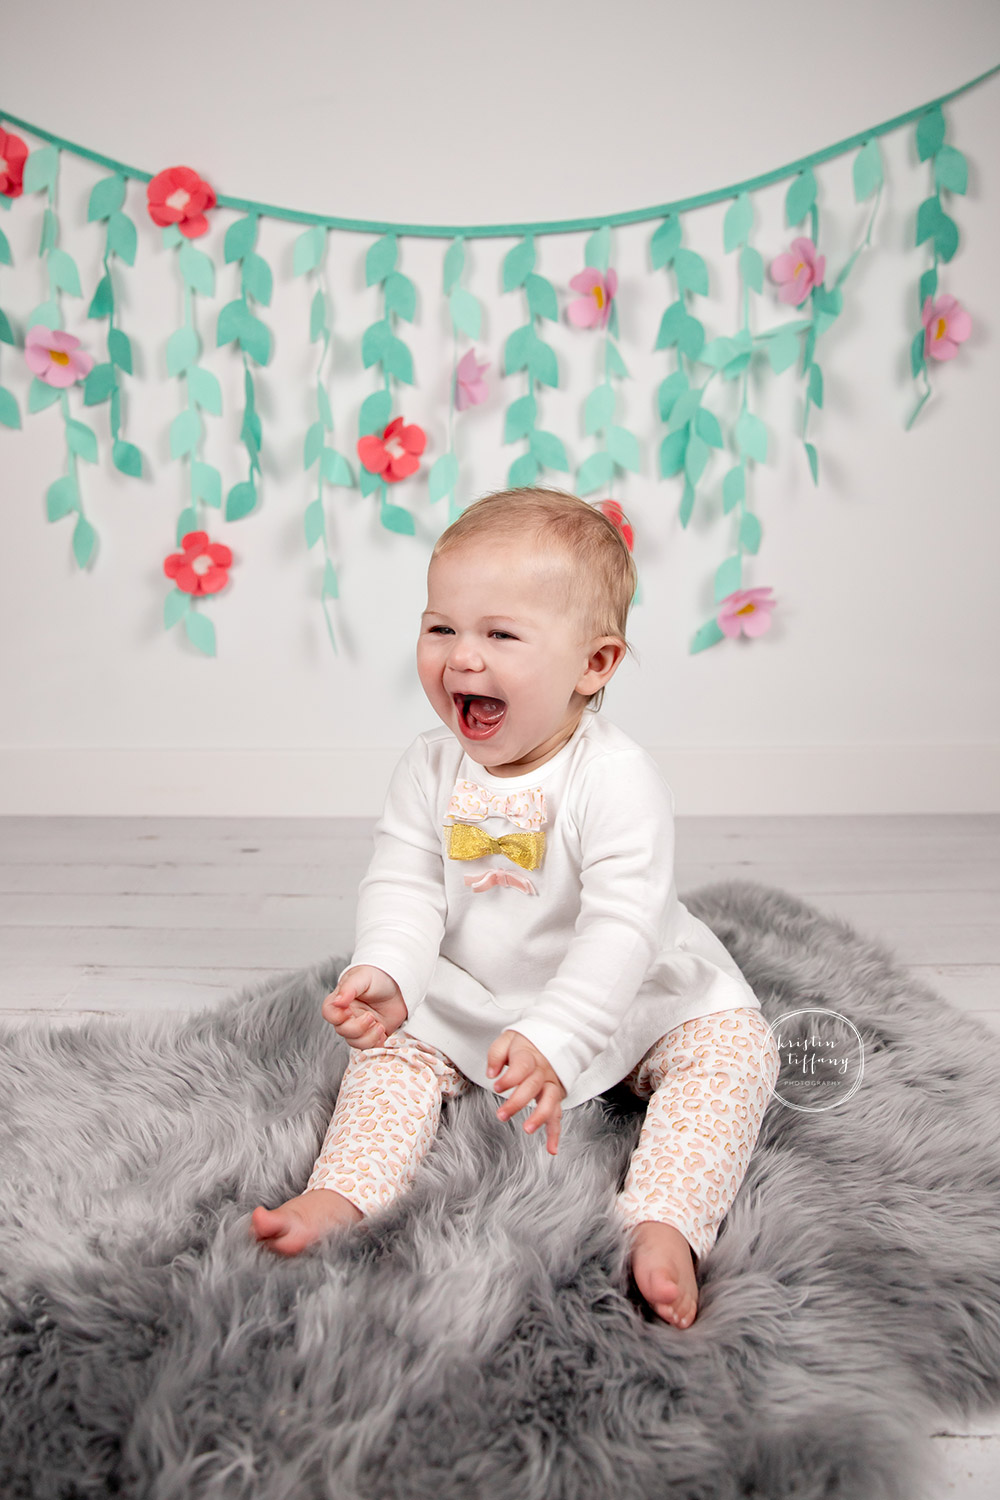 a photo of a baby girl at her cake smash photoshoot